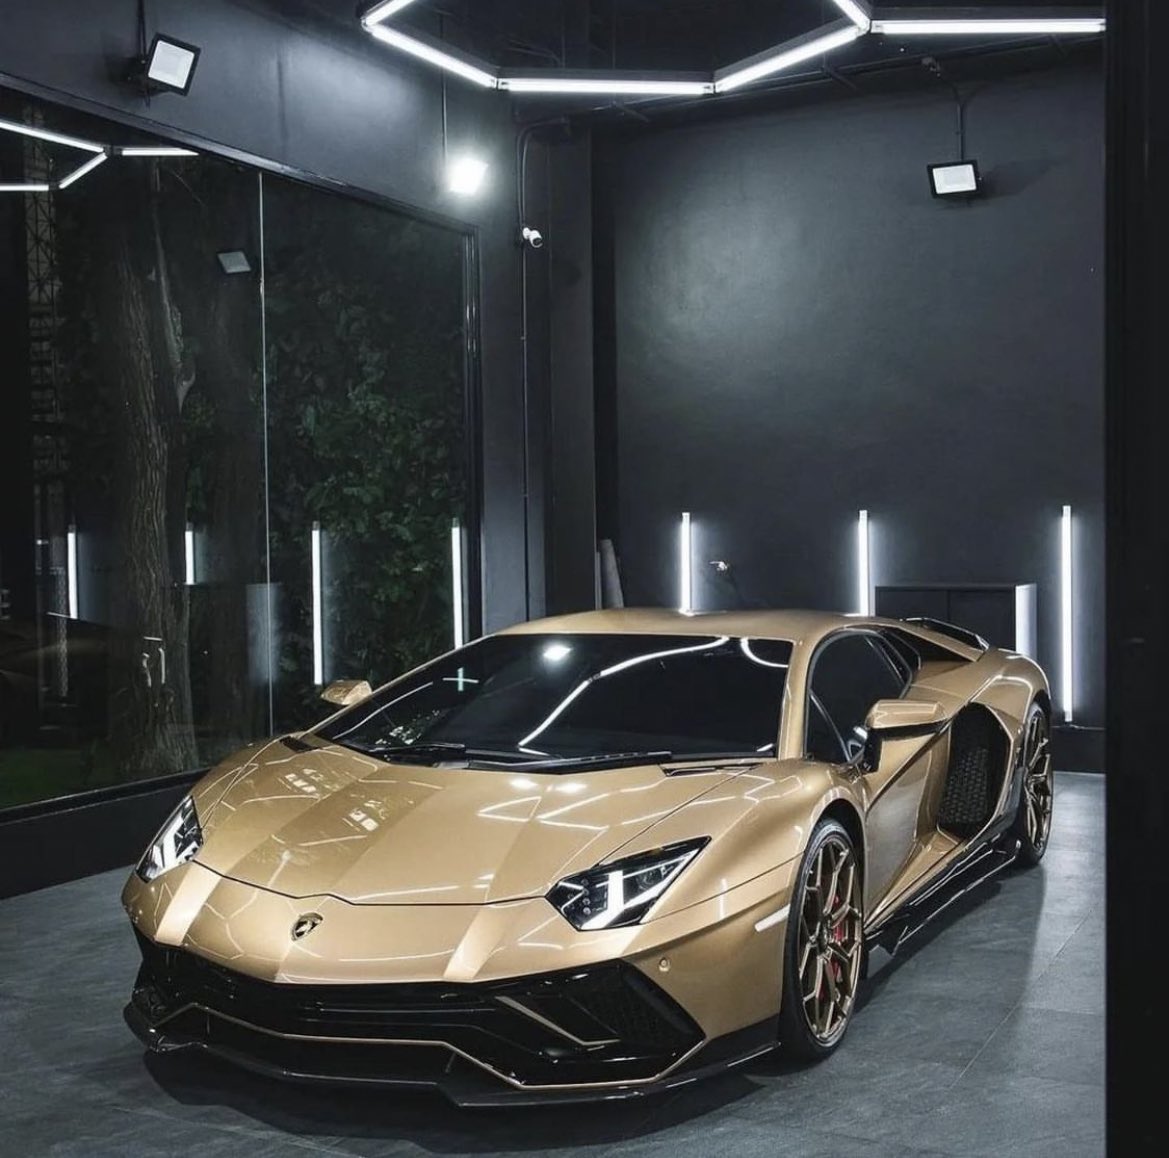 📢 In #Pi Network's OPEN #MAINNET

How much Pi Coins are you willing to spend for this A BRAND NEW CAR GOLDEN AVENTADOR '2023 ? ❤️🚘🙋

#PiNetwork #PiNetworkUpdates #web3 #Payment #PiTransaction #PiChainMall #Pigcv #PiCoreTeam #PiCoin #decentralized #Mainnet #DrNicolas #Kyc #Web3